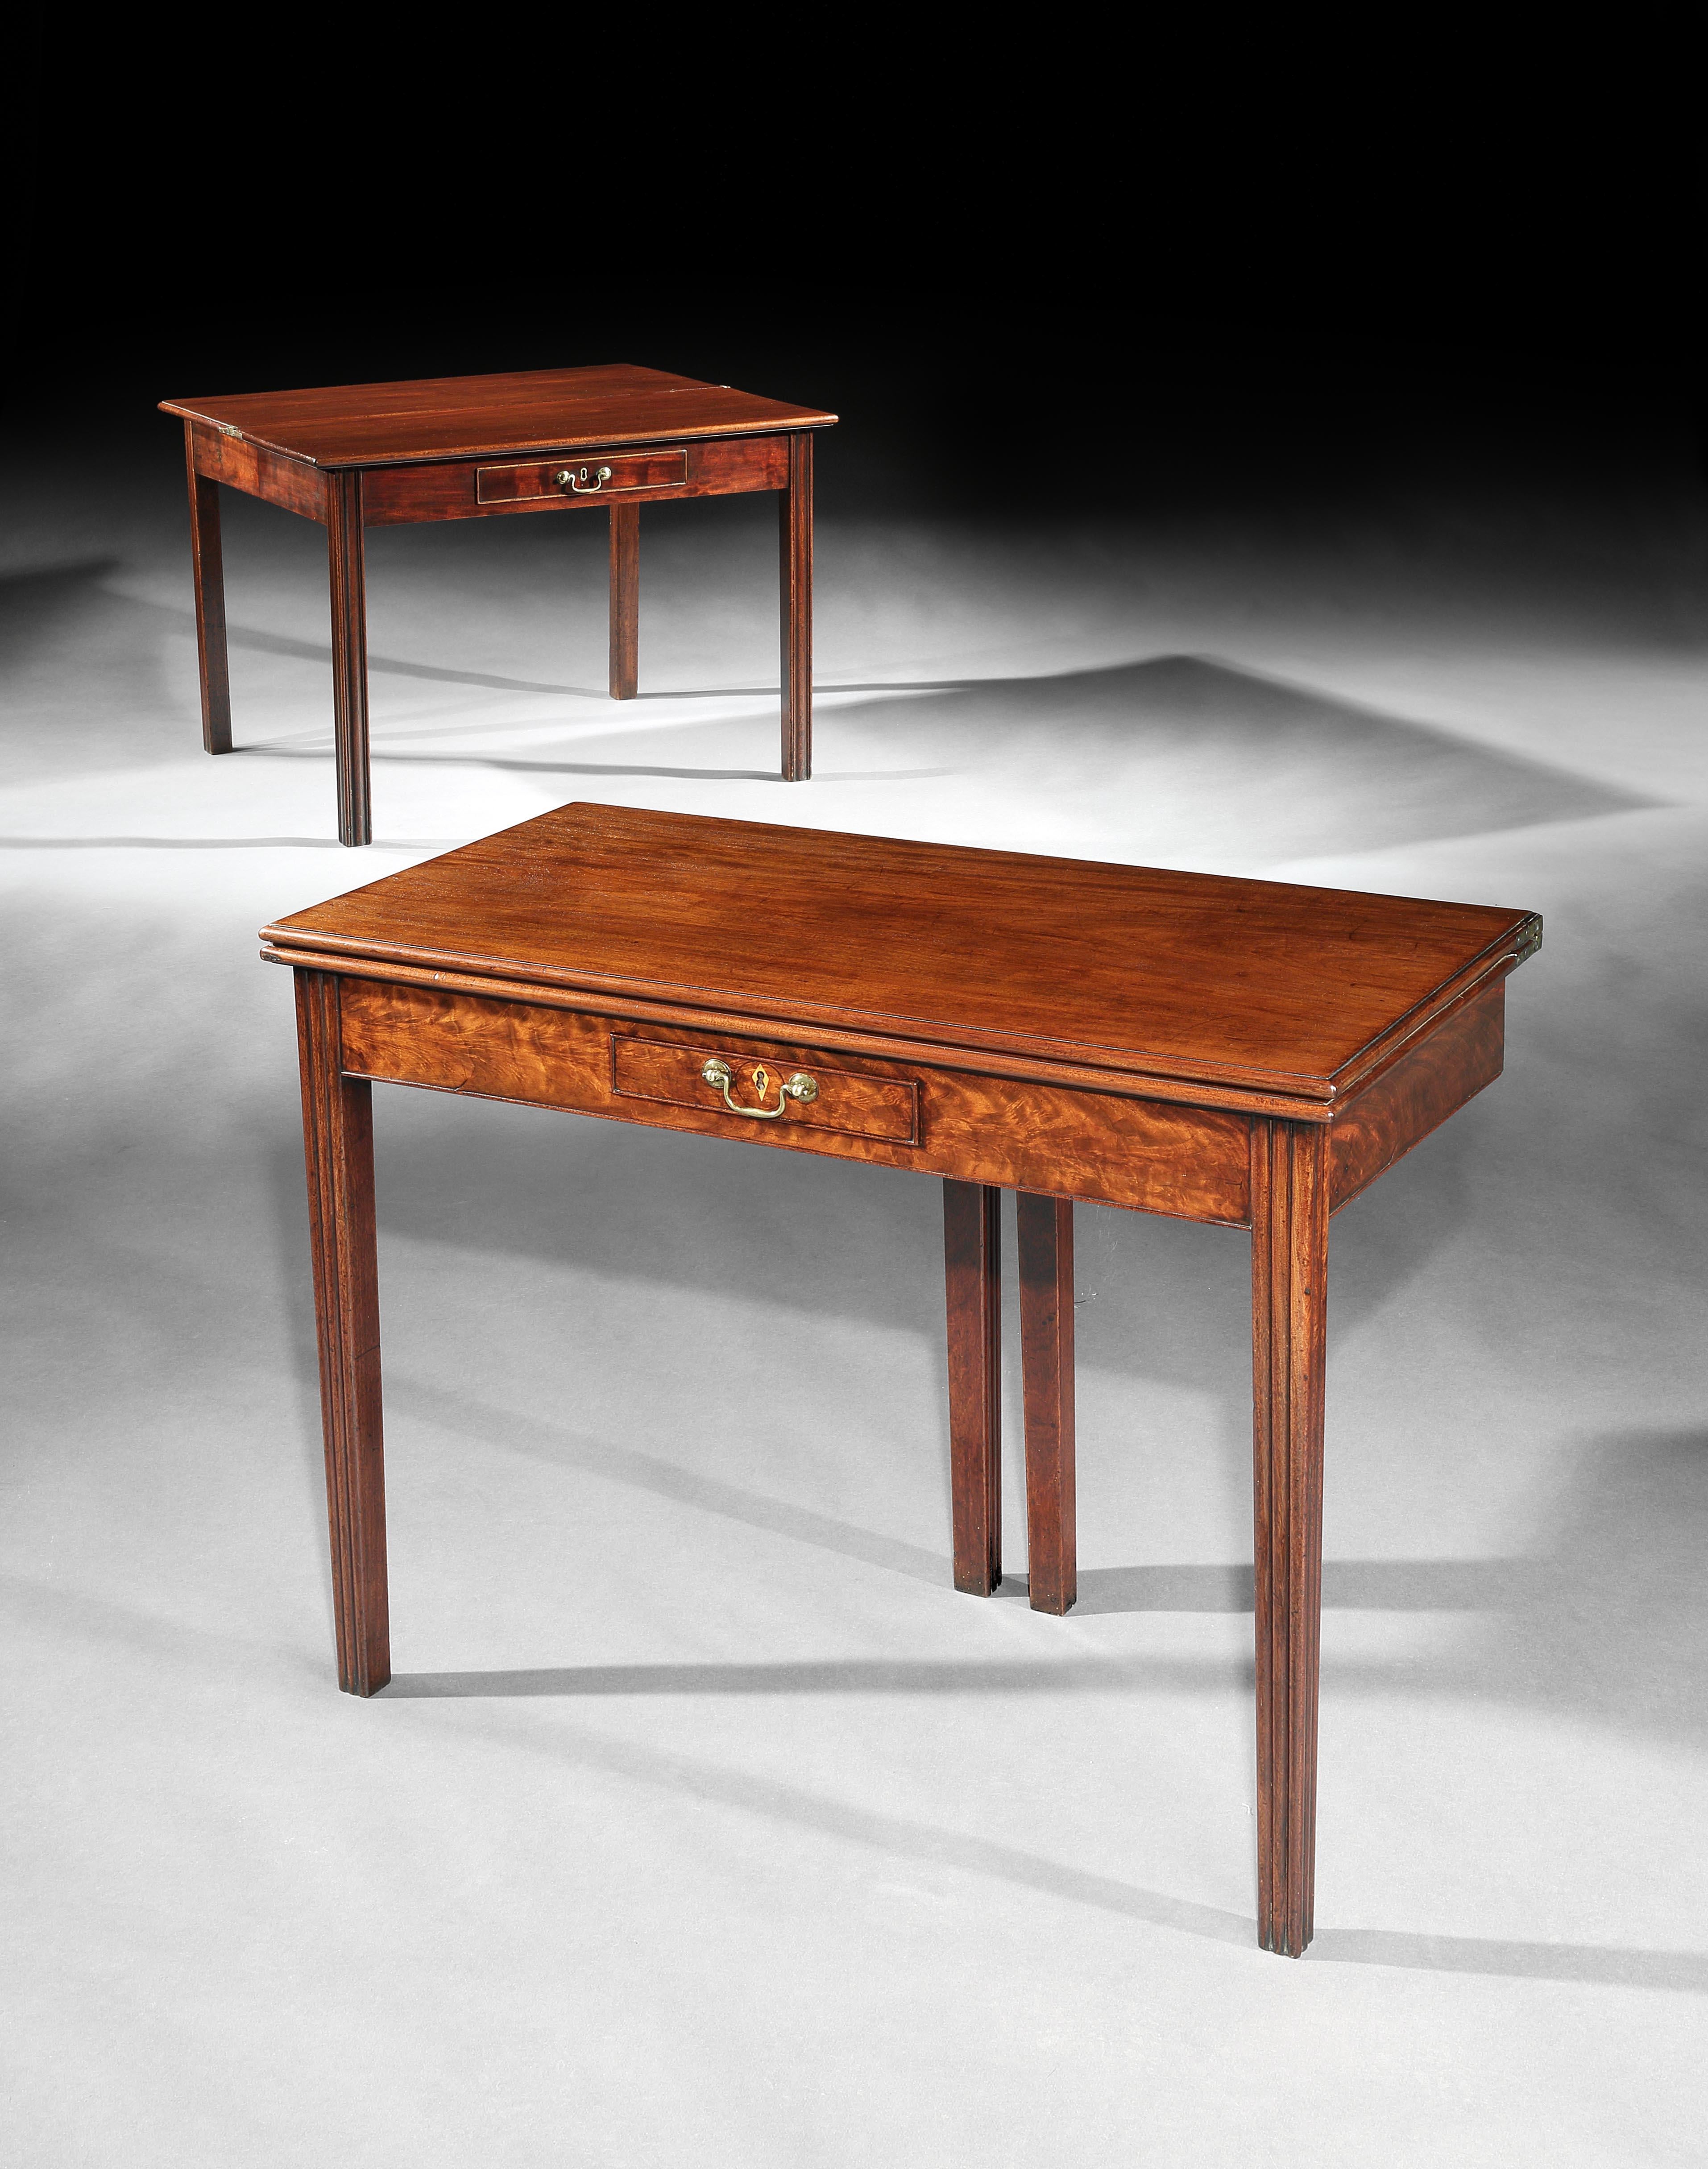 These card tables are the same model with some minor differences; one has a plum pudding figured frieze and boxwood escutcheon and the other is slightly larger. It is difficult to source pairs of tables and these came from the same collection. They